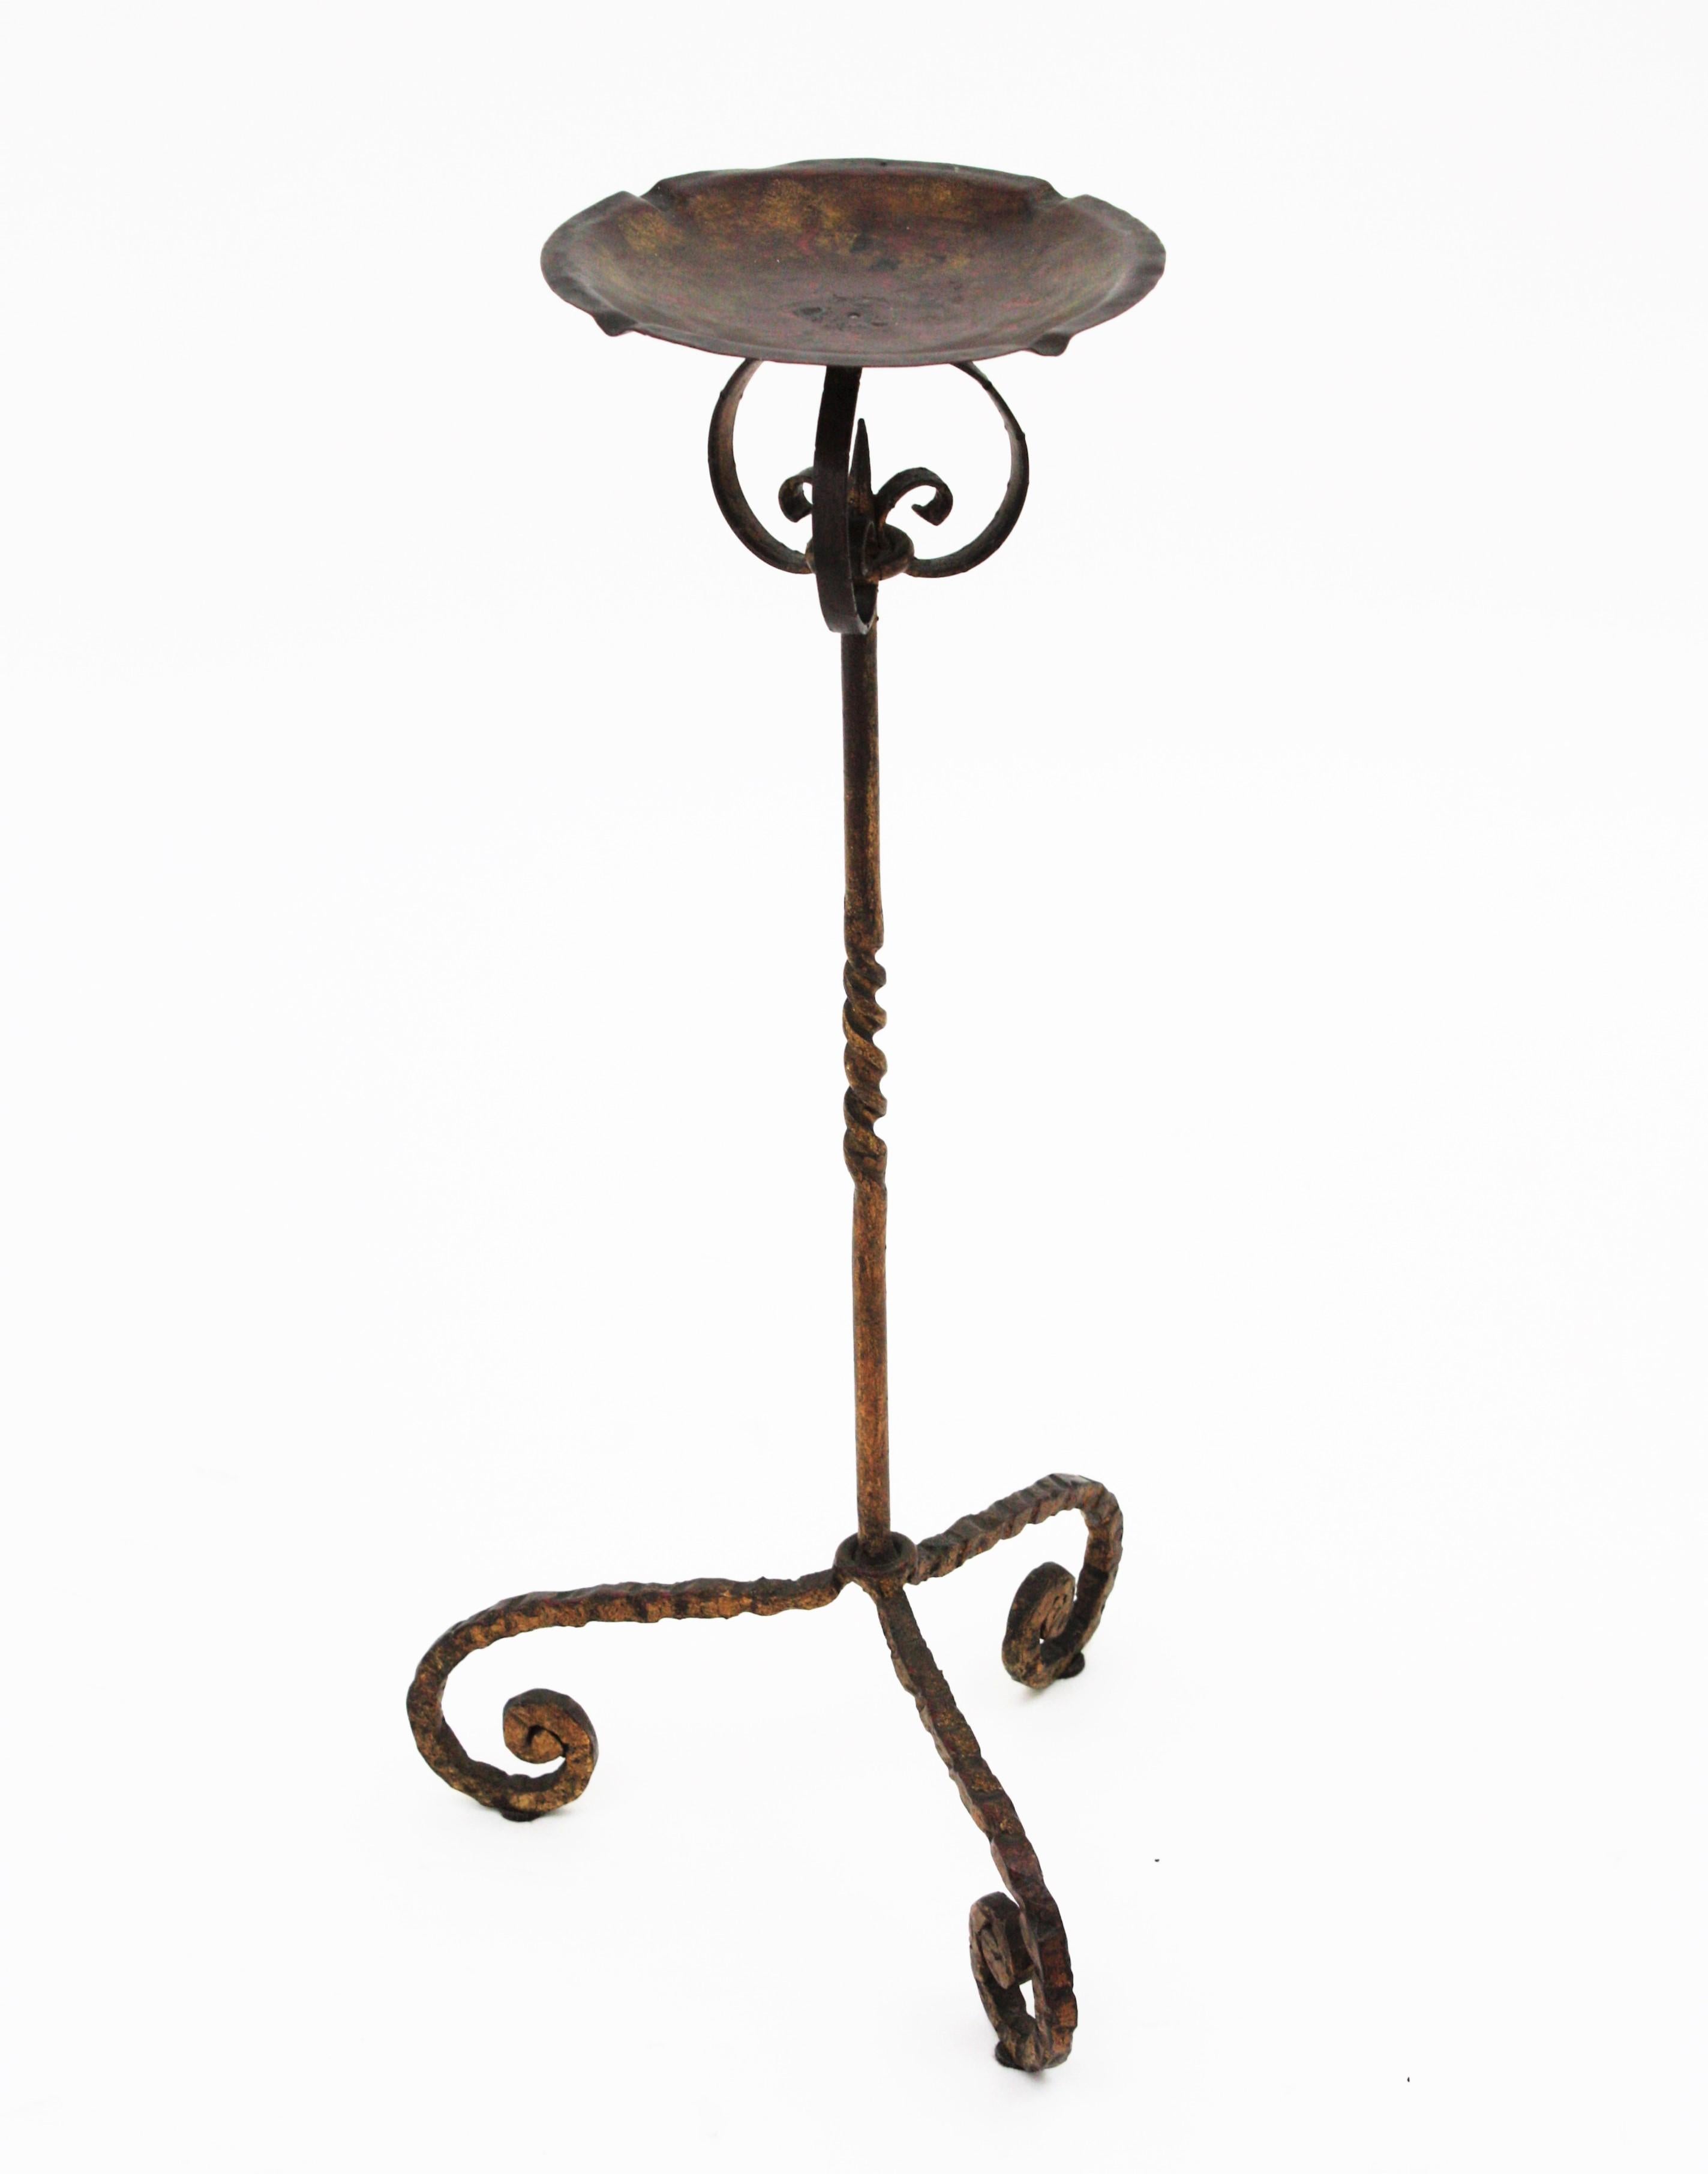 Spanish Drinks Table / Side Table / Floor Ashtray, Wrought Iron, 1940s For Sale 4